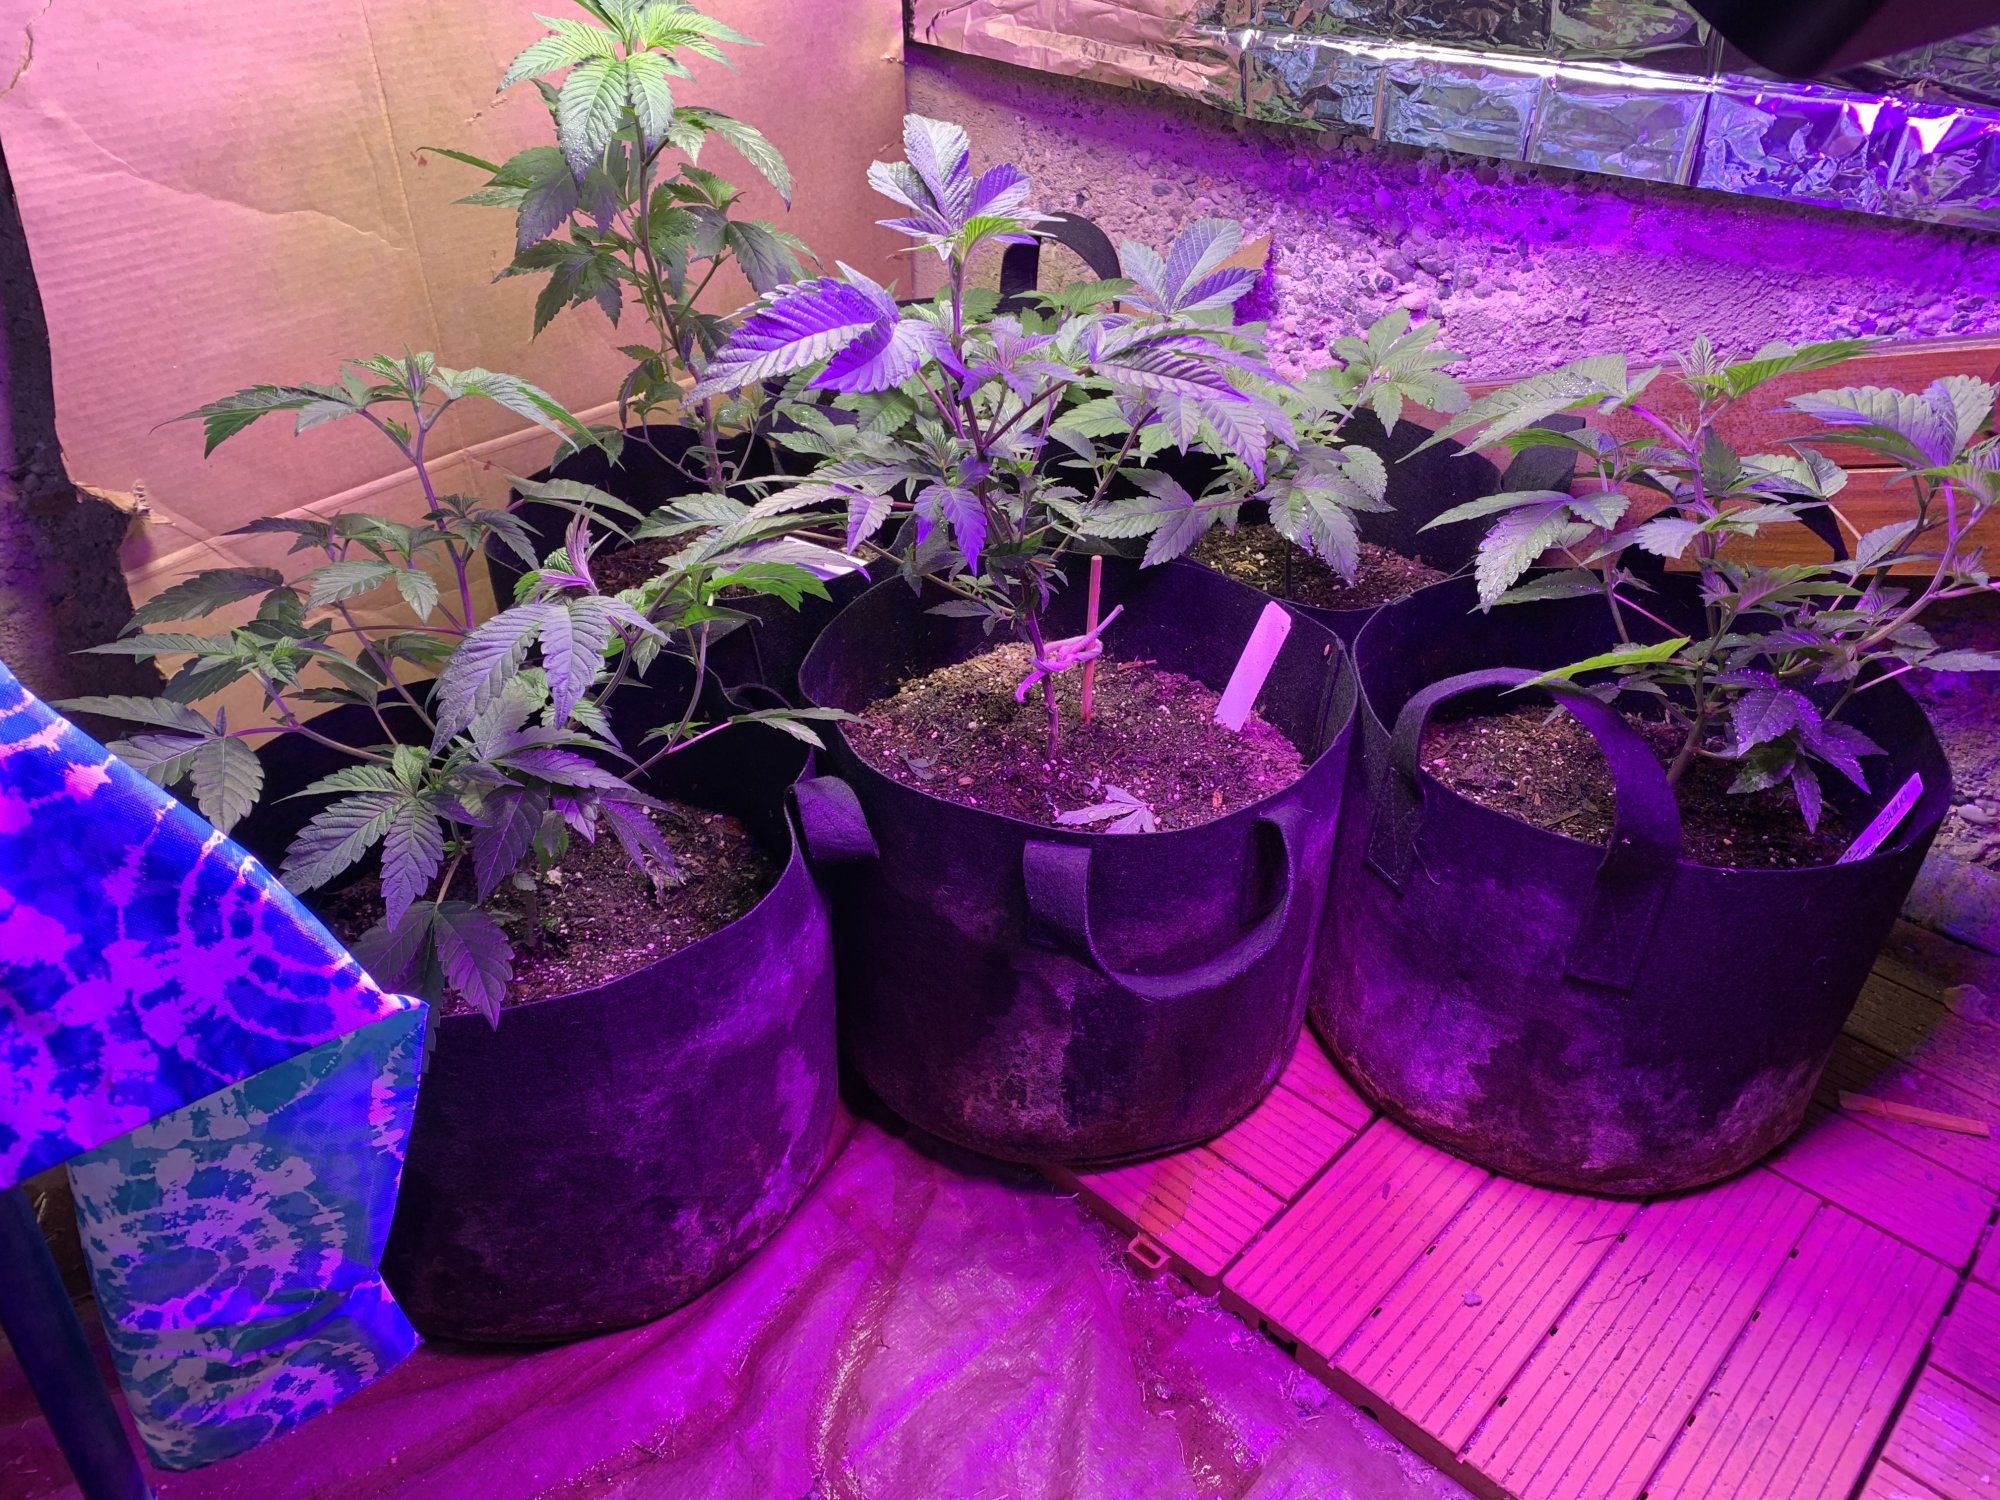 66 days first indoor learning a lot